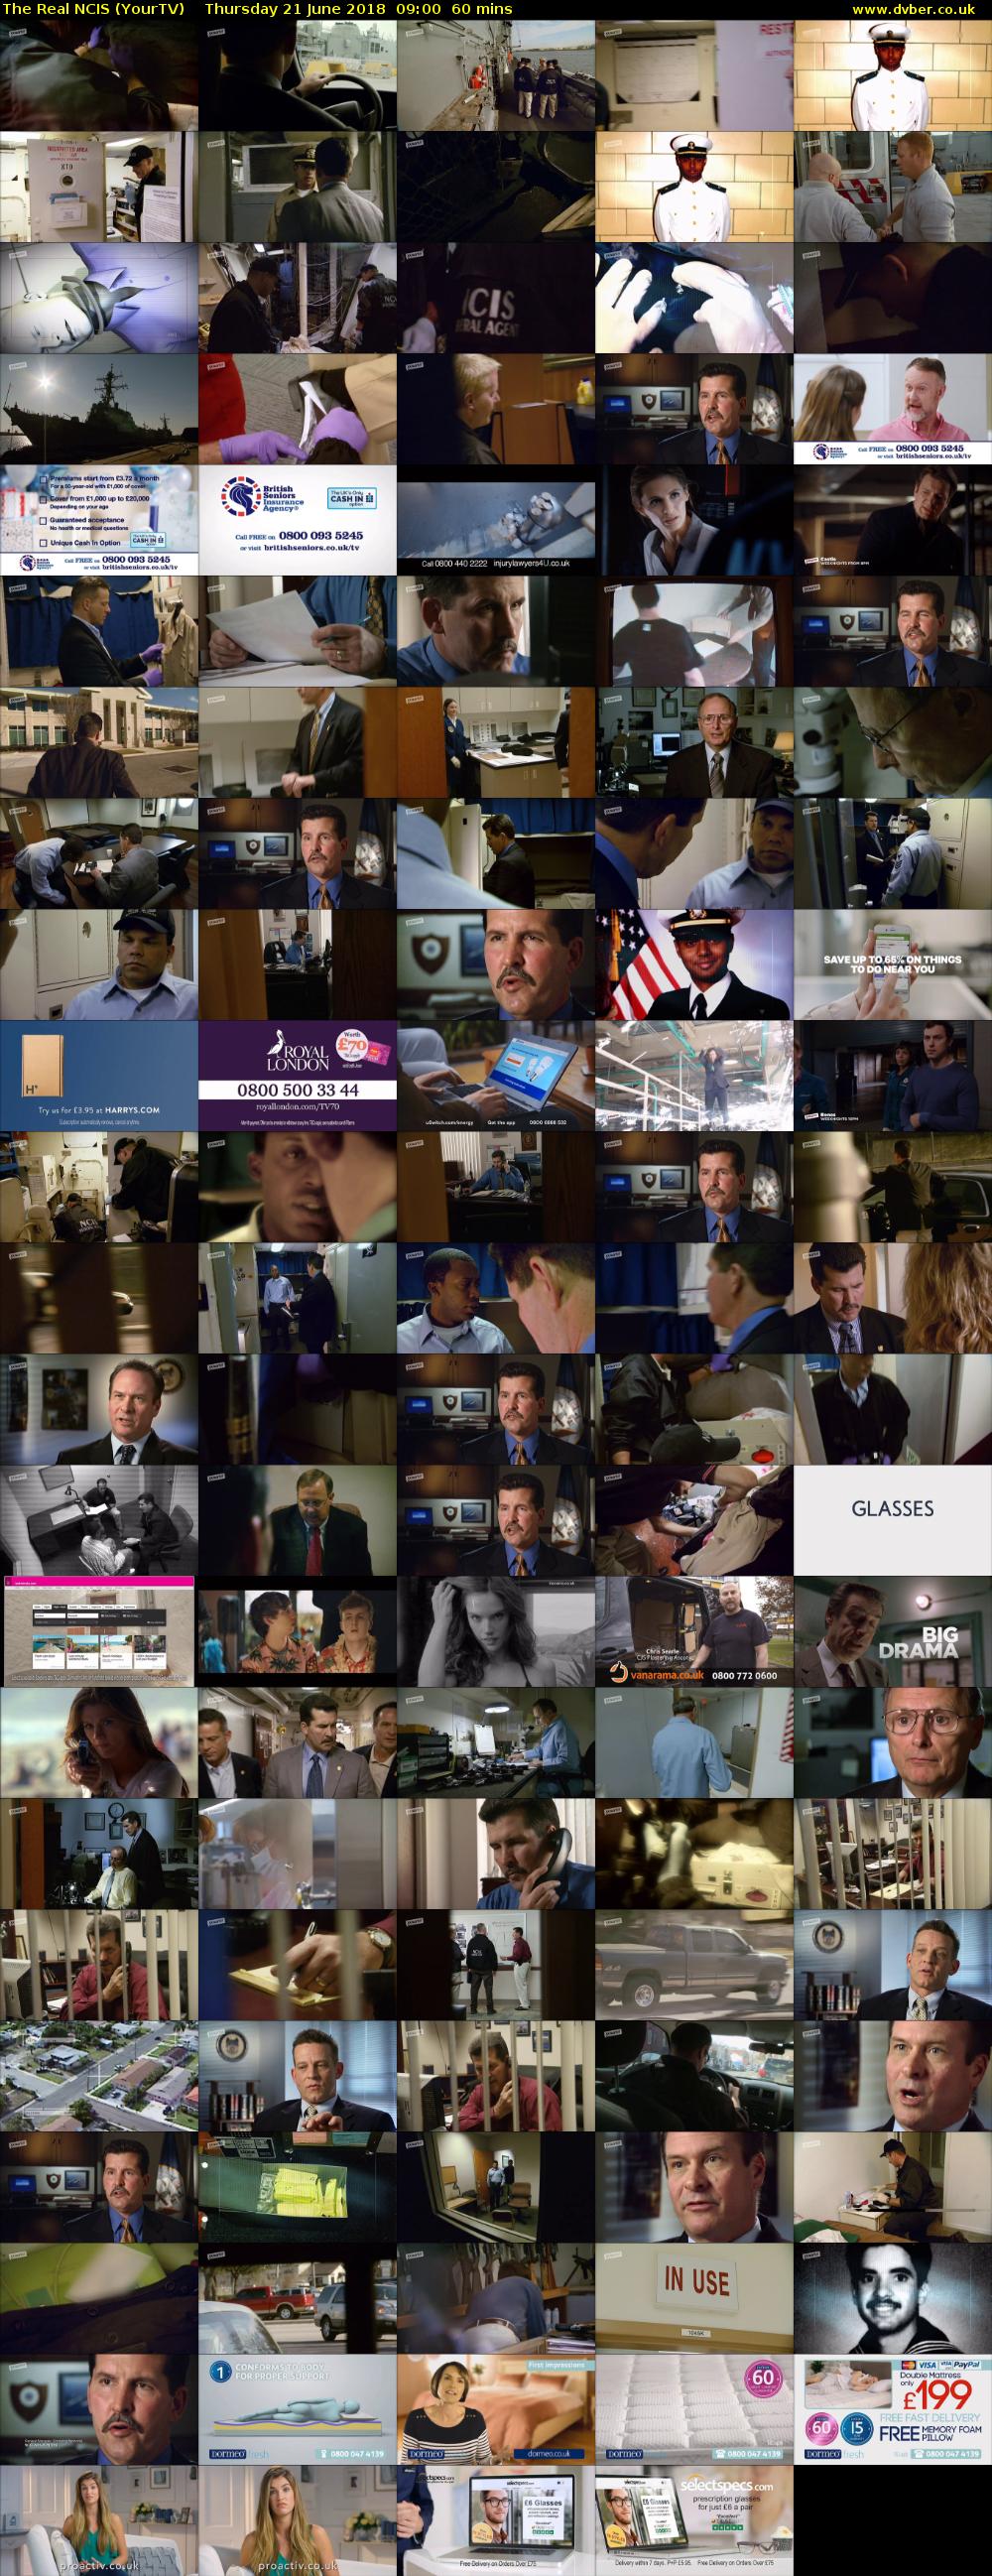 The Real NCIS (YourTV) Thursday 21 June 2018 09:00 - 10:00